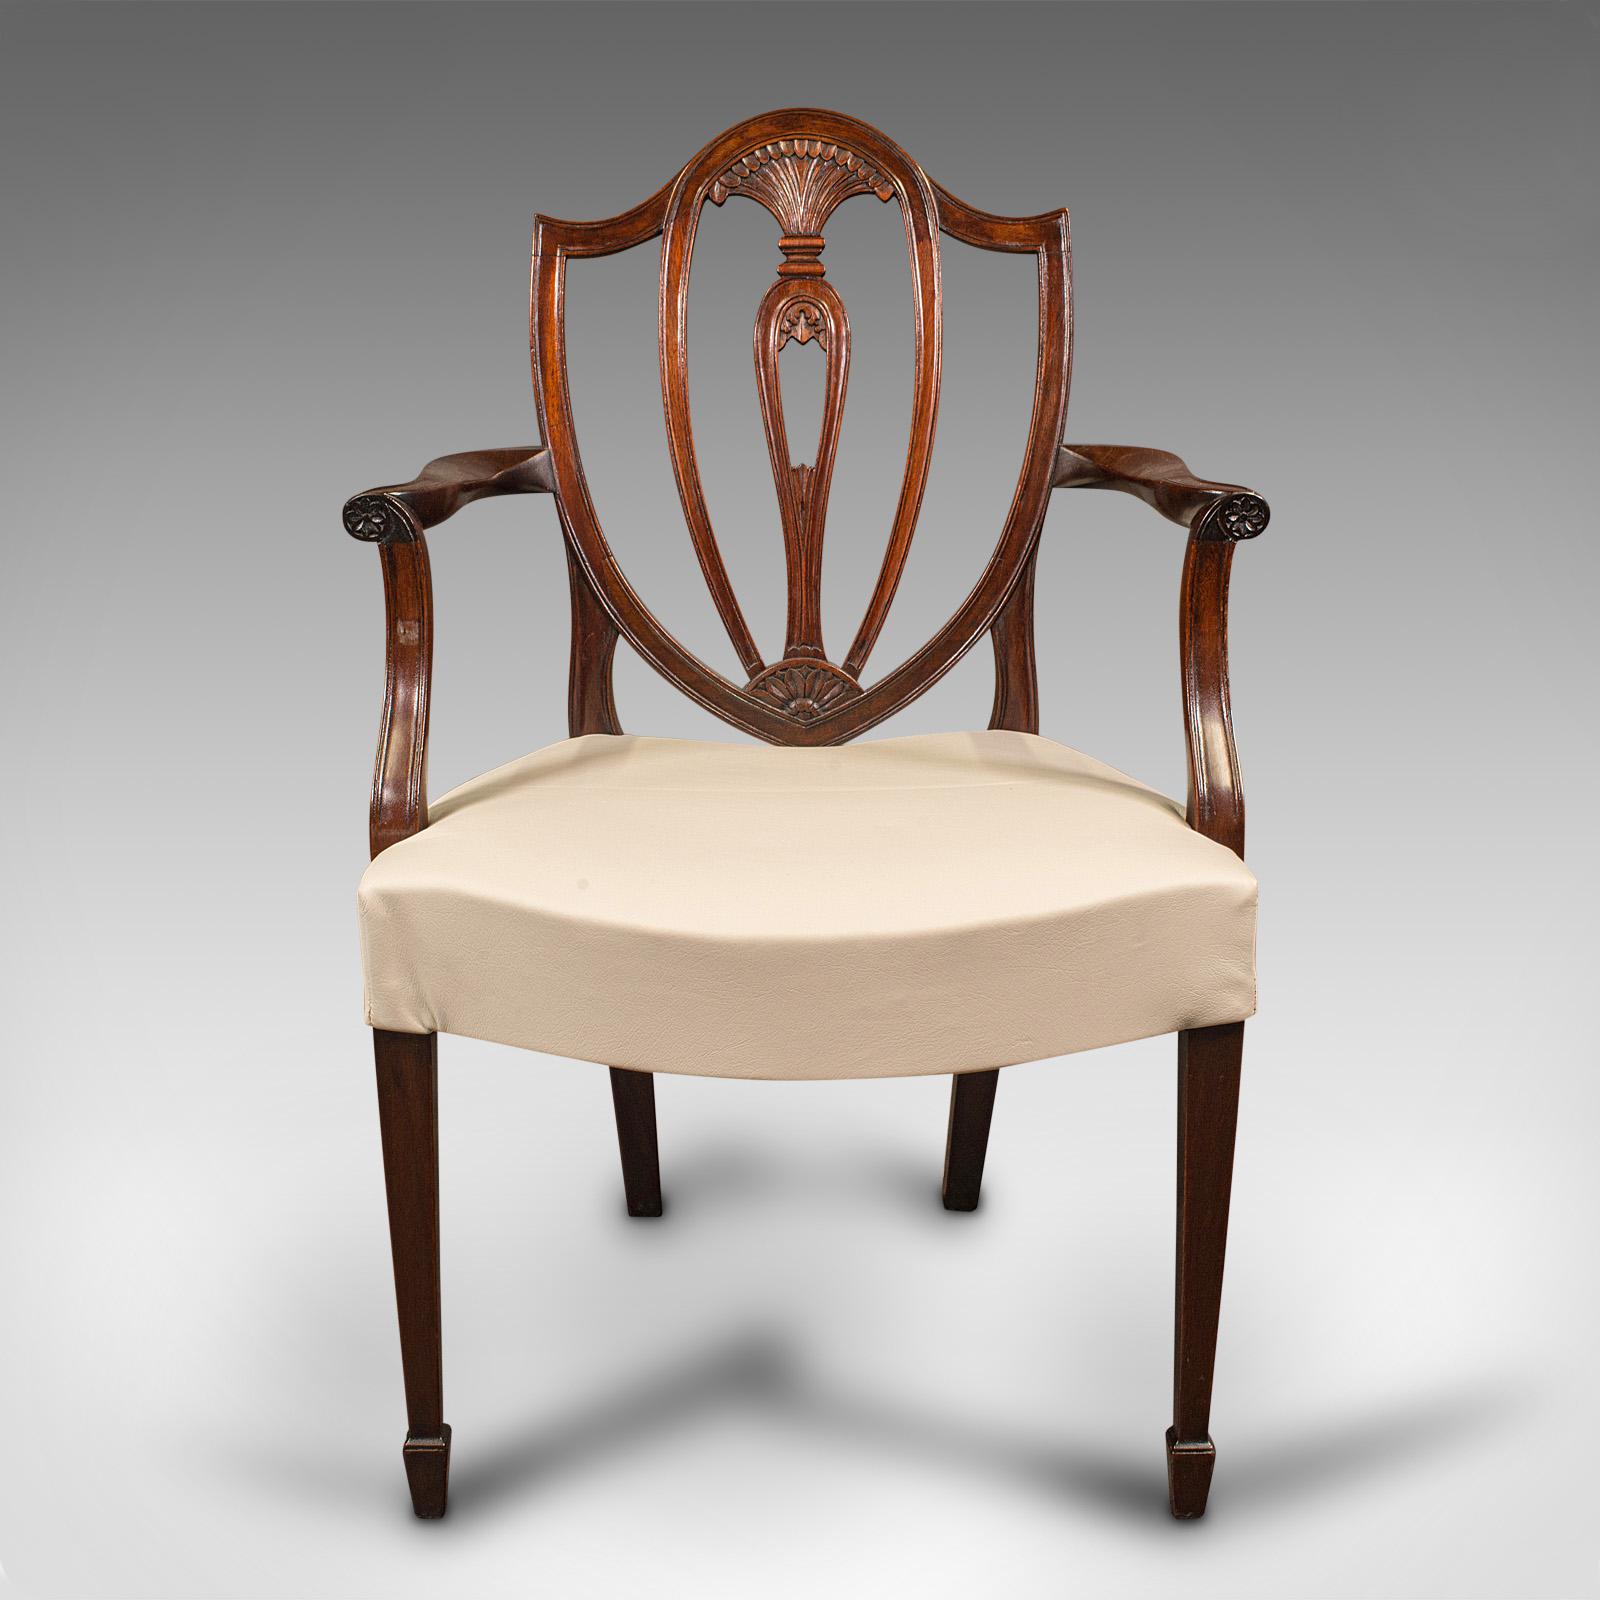 This is a long set of 14 antique dining chairs. An English, mahogany seat in Chippendale revival taste, dating to the late Victorian period, circa 1900.

Extraordinary suite of fourteen chairs for the grandest of dining rooms
Of generous width,